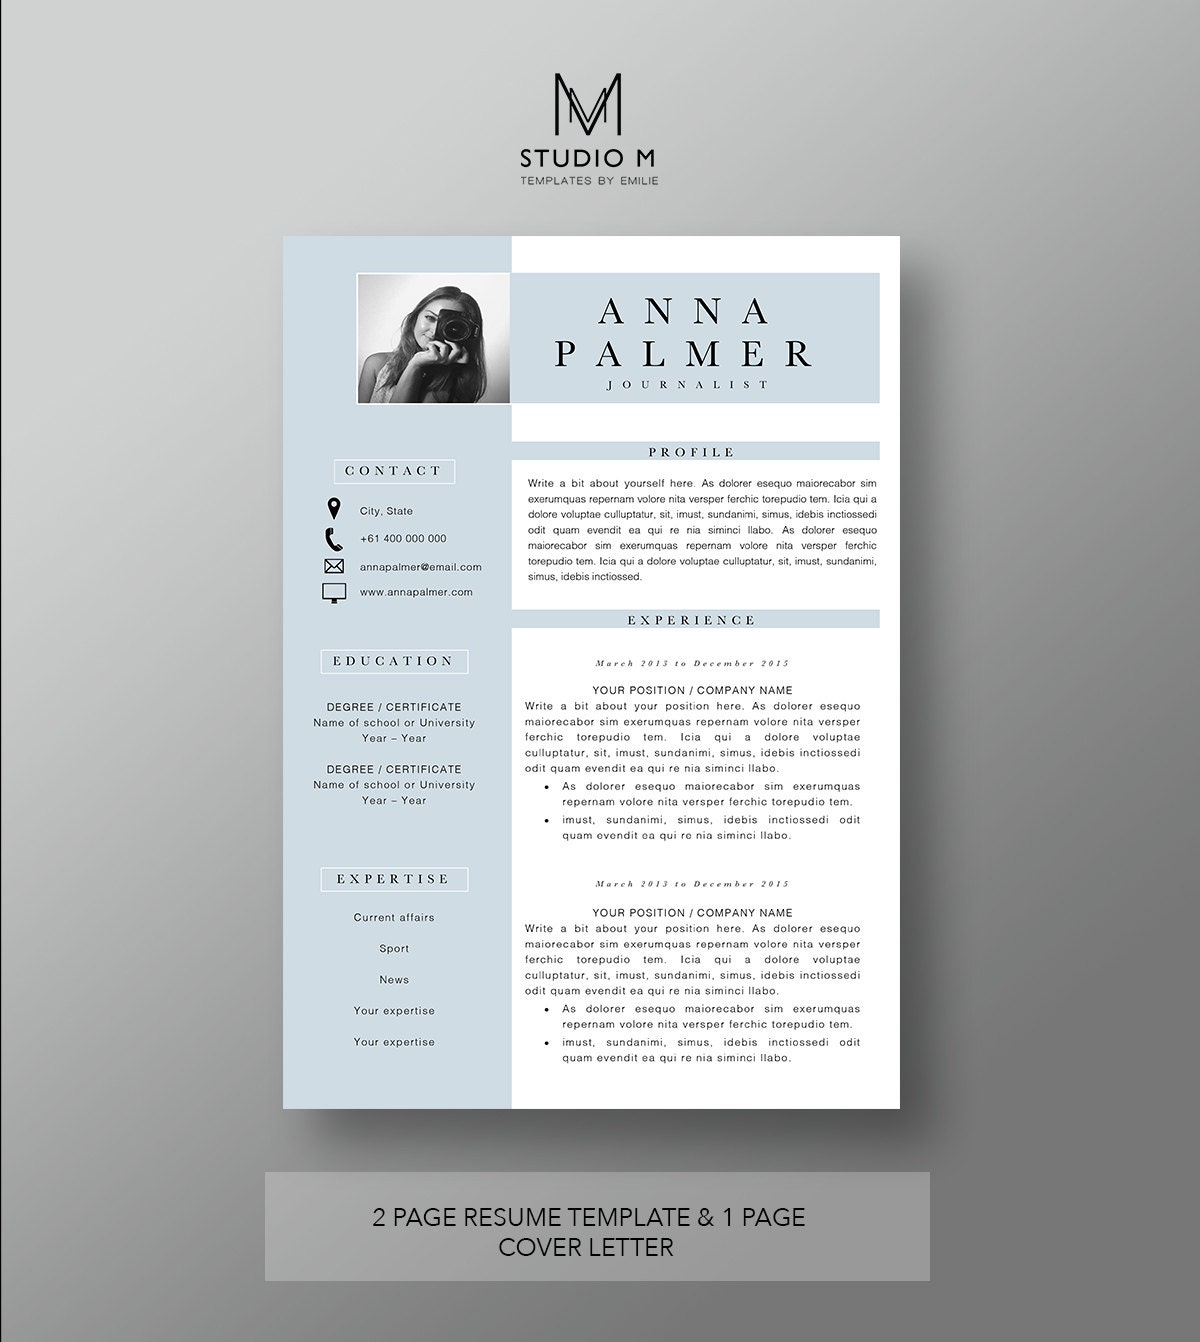 Professional Resume and Cover Letter Template Resume Design - Etsy ...